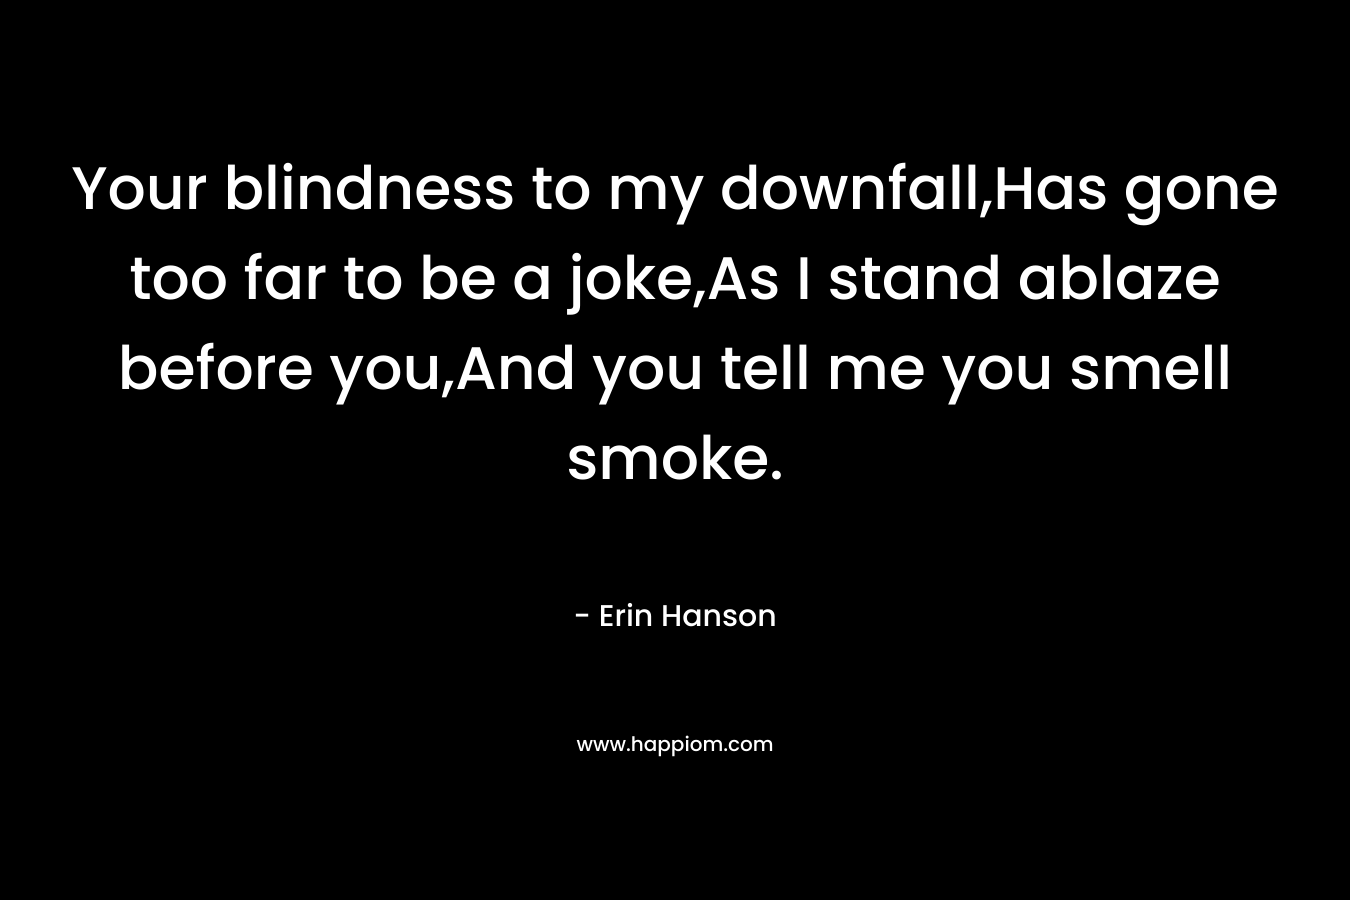 Your blindness to my downfall,Has gone too far to be a joke,As I stand ablaze before you,And you tell me you smell smoke. – Erin Hanson